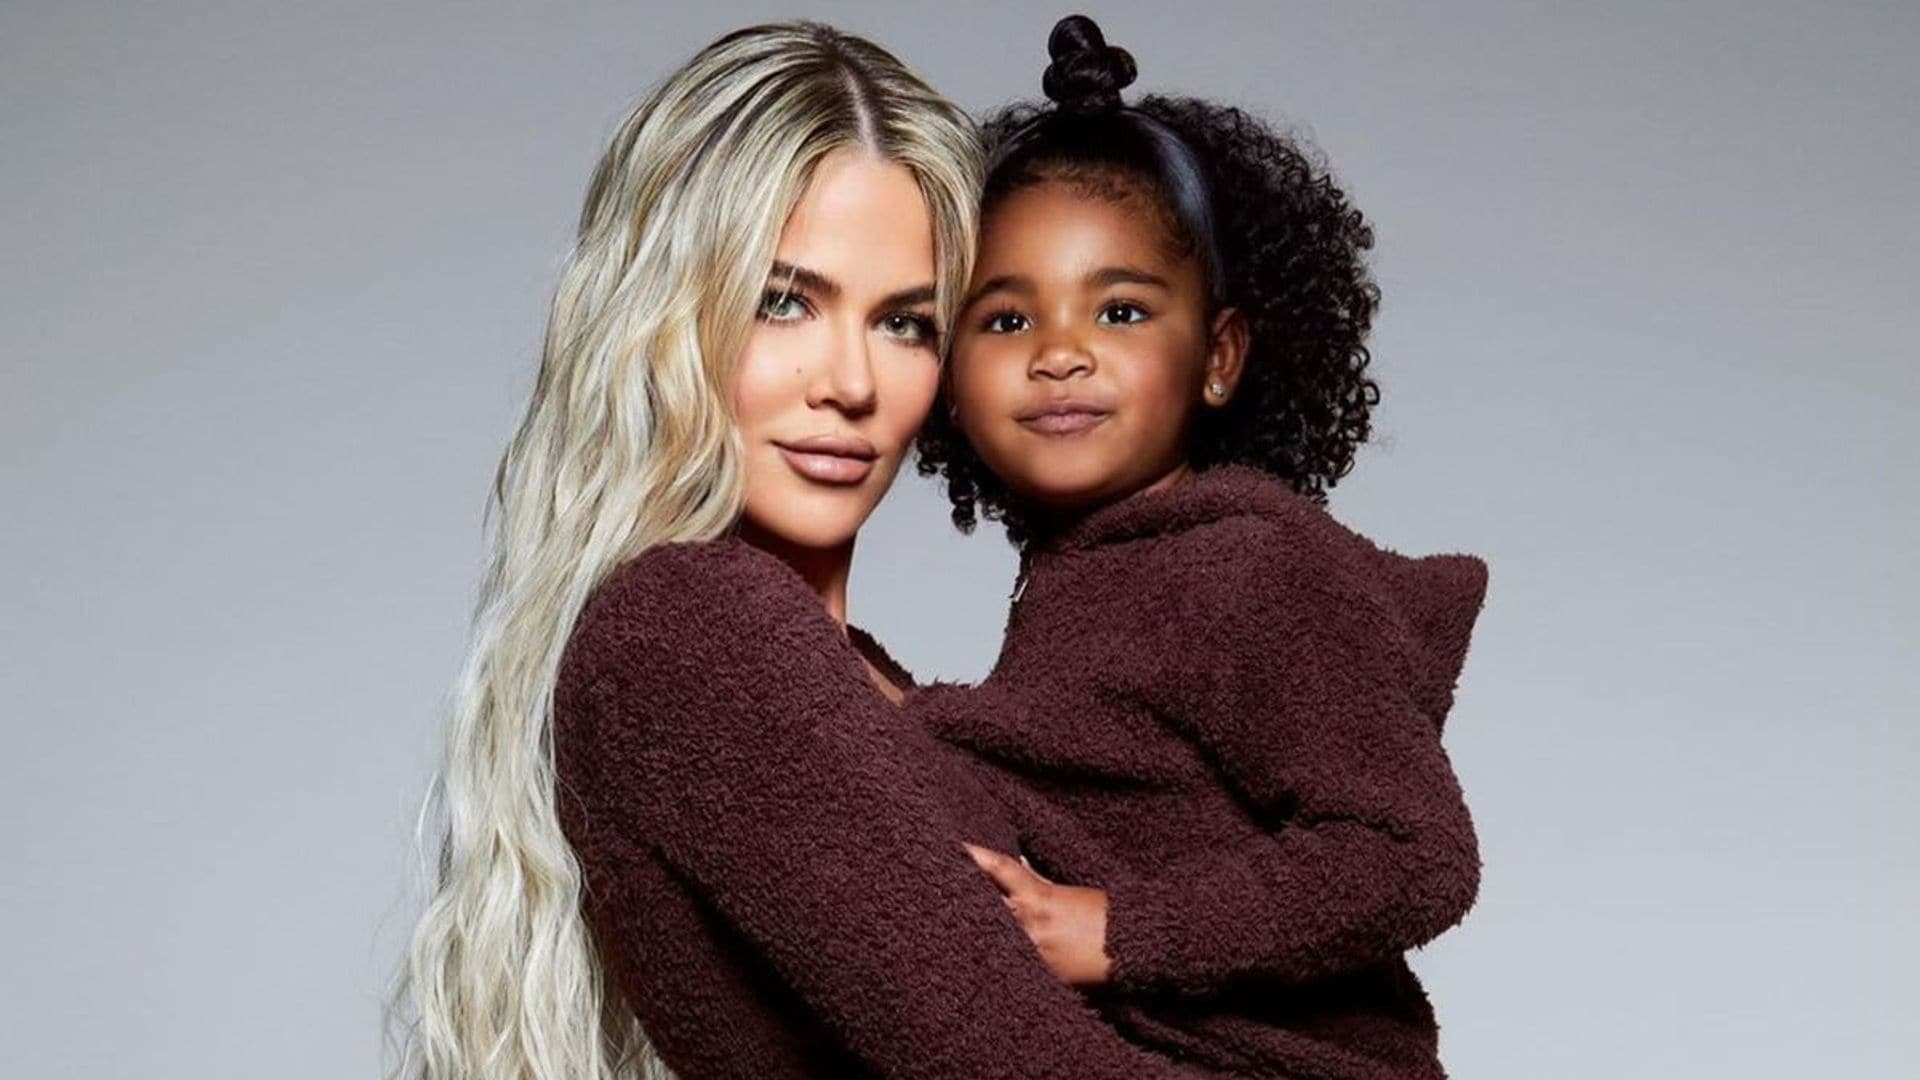 Khloe Kardashian looks spectacular in family Christmas pictures with True